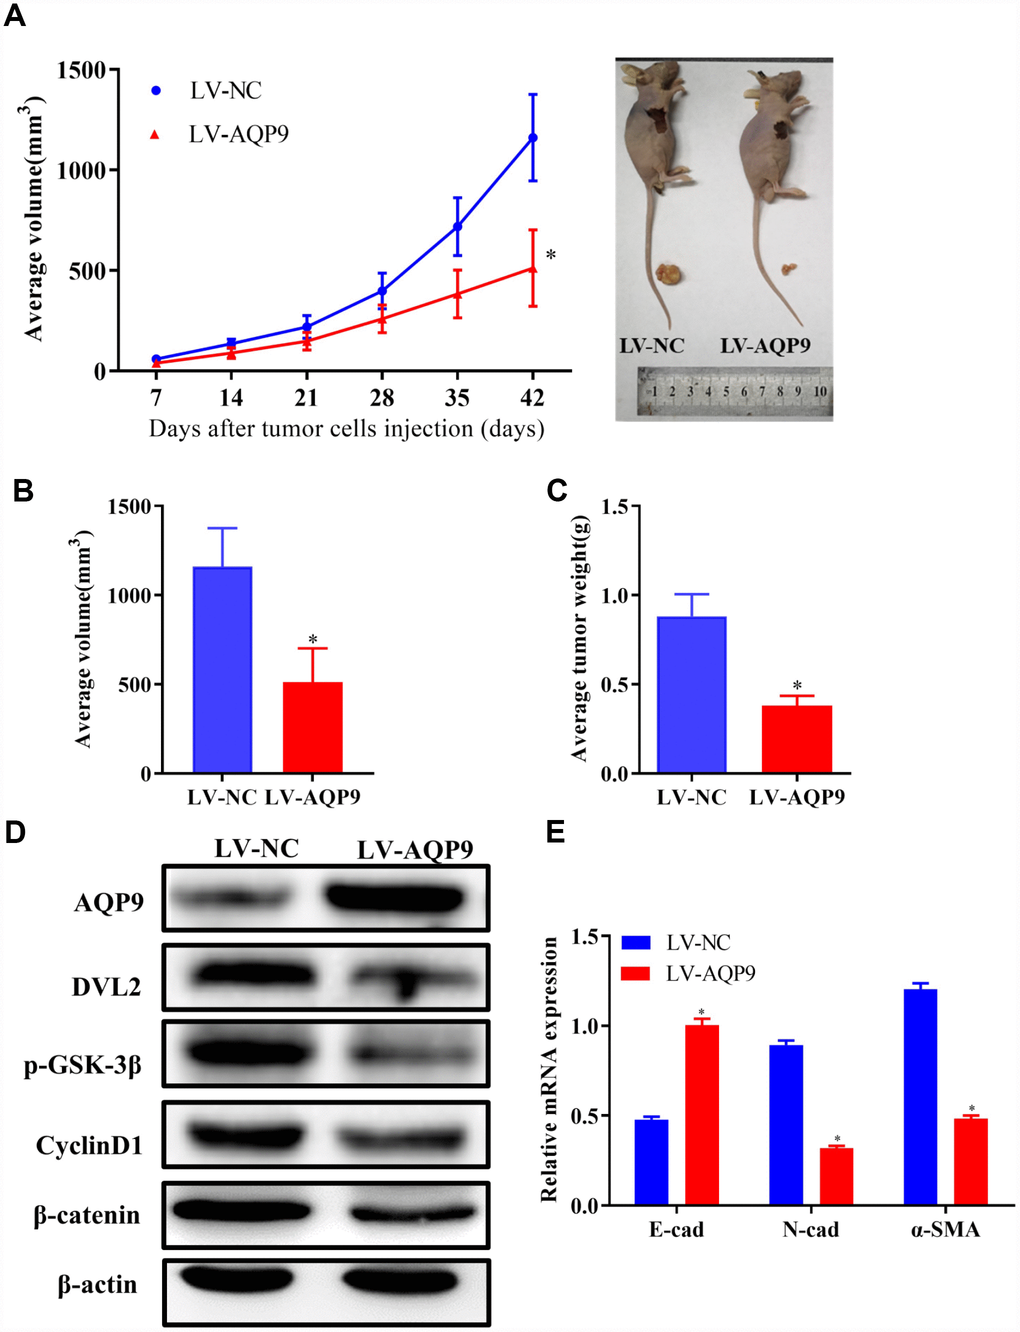 Overexpression of AQP9 suppressed tumor growth of HCC in vivo. (A) The growth curves of tumors from nude mice in LV-NC and LV-AQP9 group. (B and C). Orthotopic tumor volumes and weights at day 42 post-injection were calculated. (D) The protein levels of AQP9, DVL2, GSK-3β, CyclinD1 and β-catenin in isolated tumors were examined using western blotting. (E) The mRNA levels of E-cad, N-cad and α-SMA were determined by RT-qPCR. The results were represented as mean ± SD. P